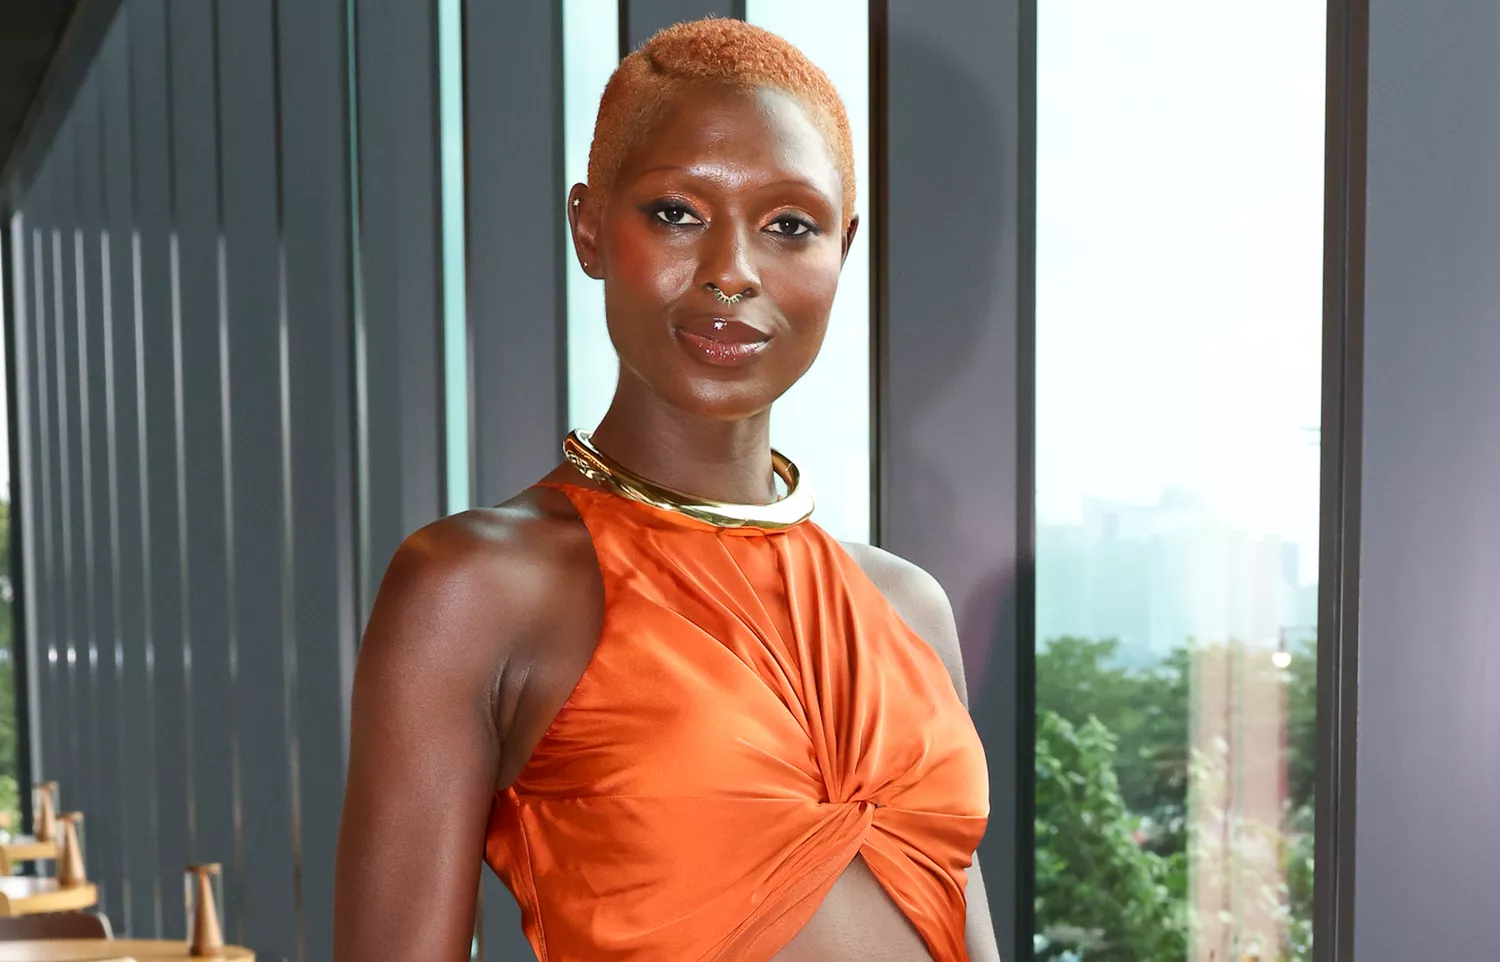 Jodie Turner-Smith Wants to Create Space for “Different Kinds of Voices” in Fashion